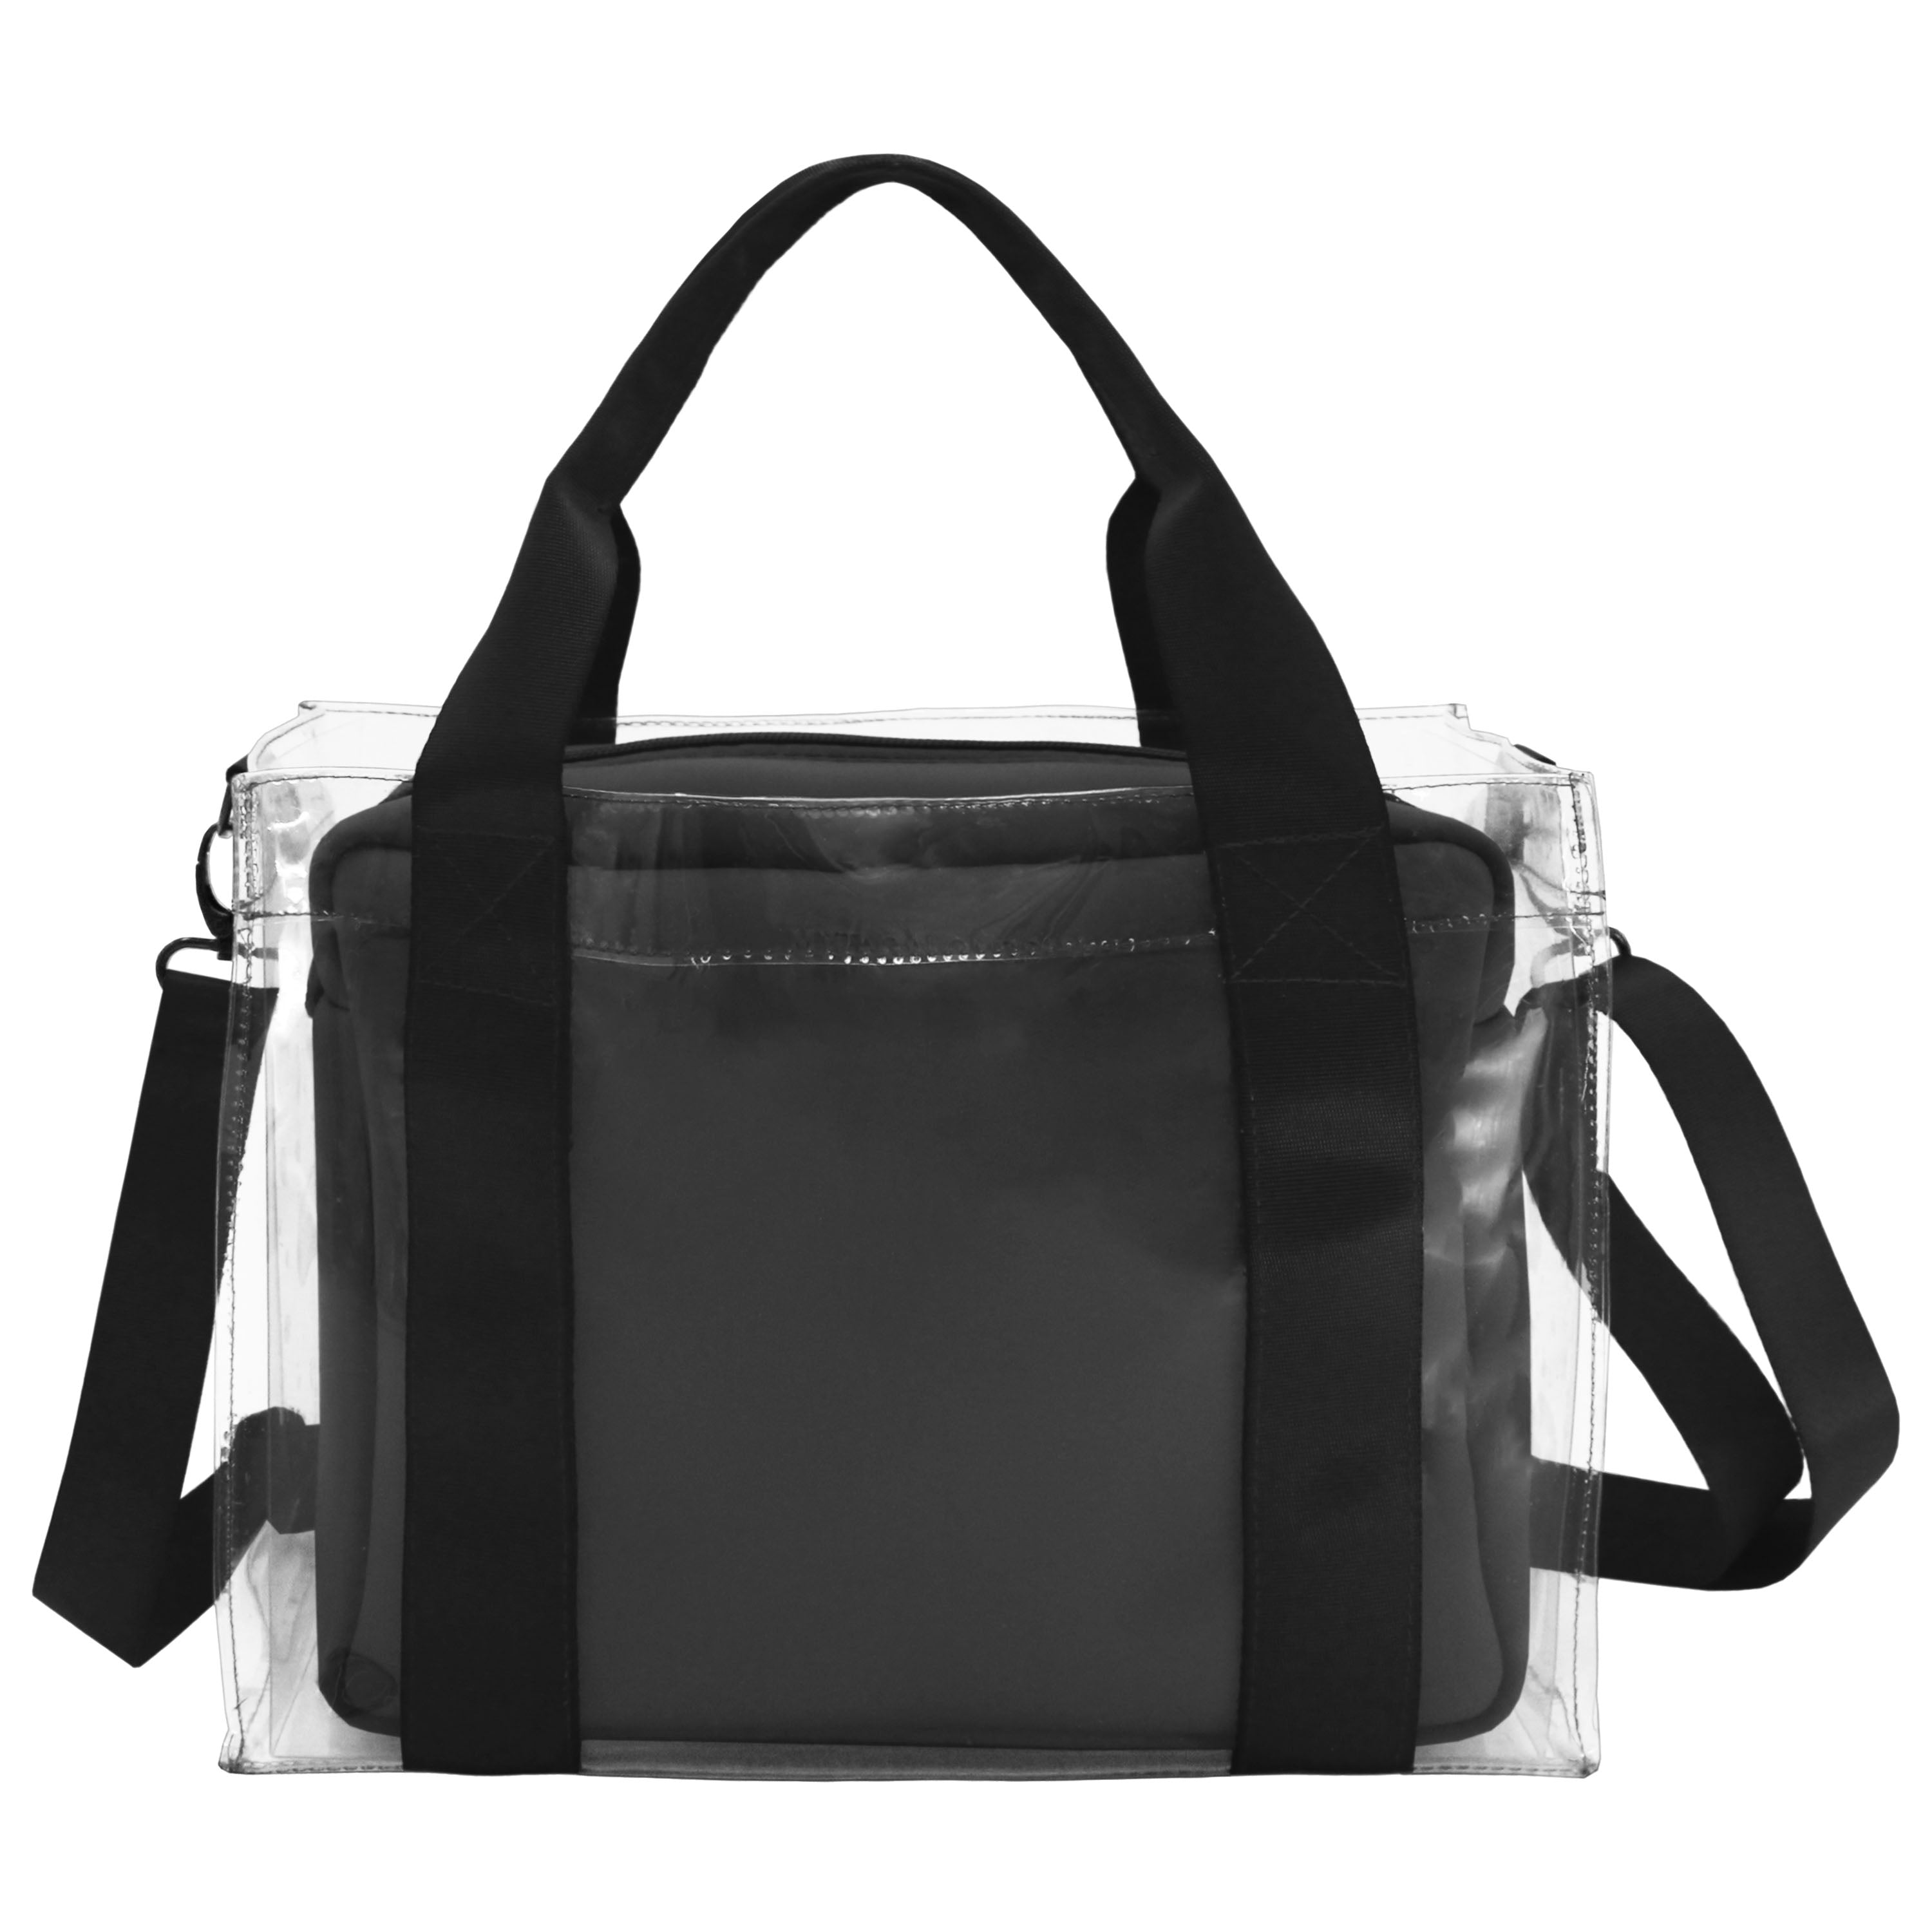 Clear lunch bag with black neoprene insert and shoulder strap 